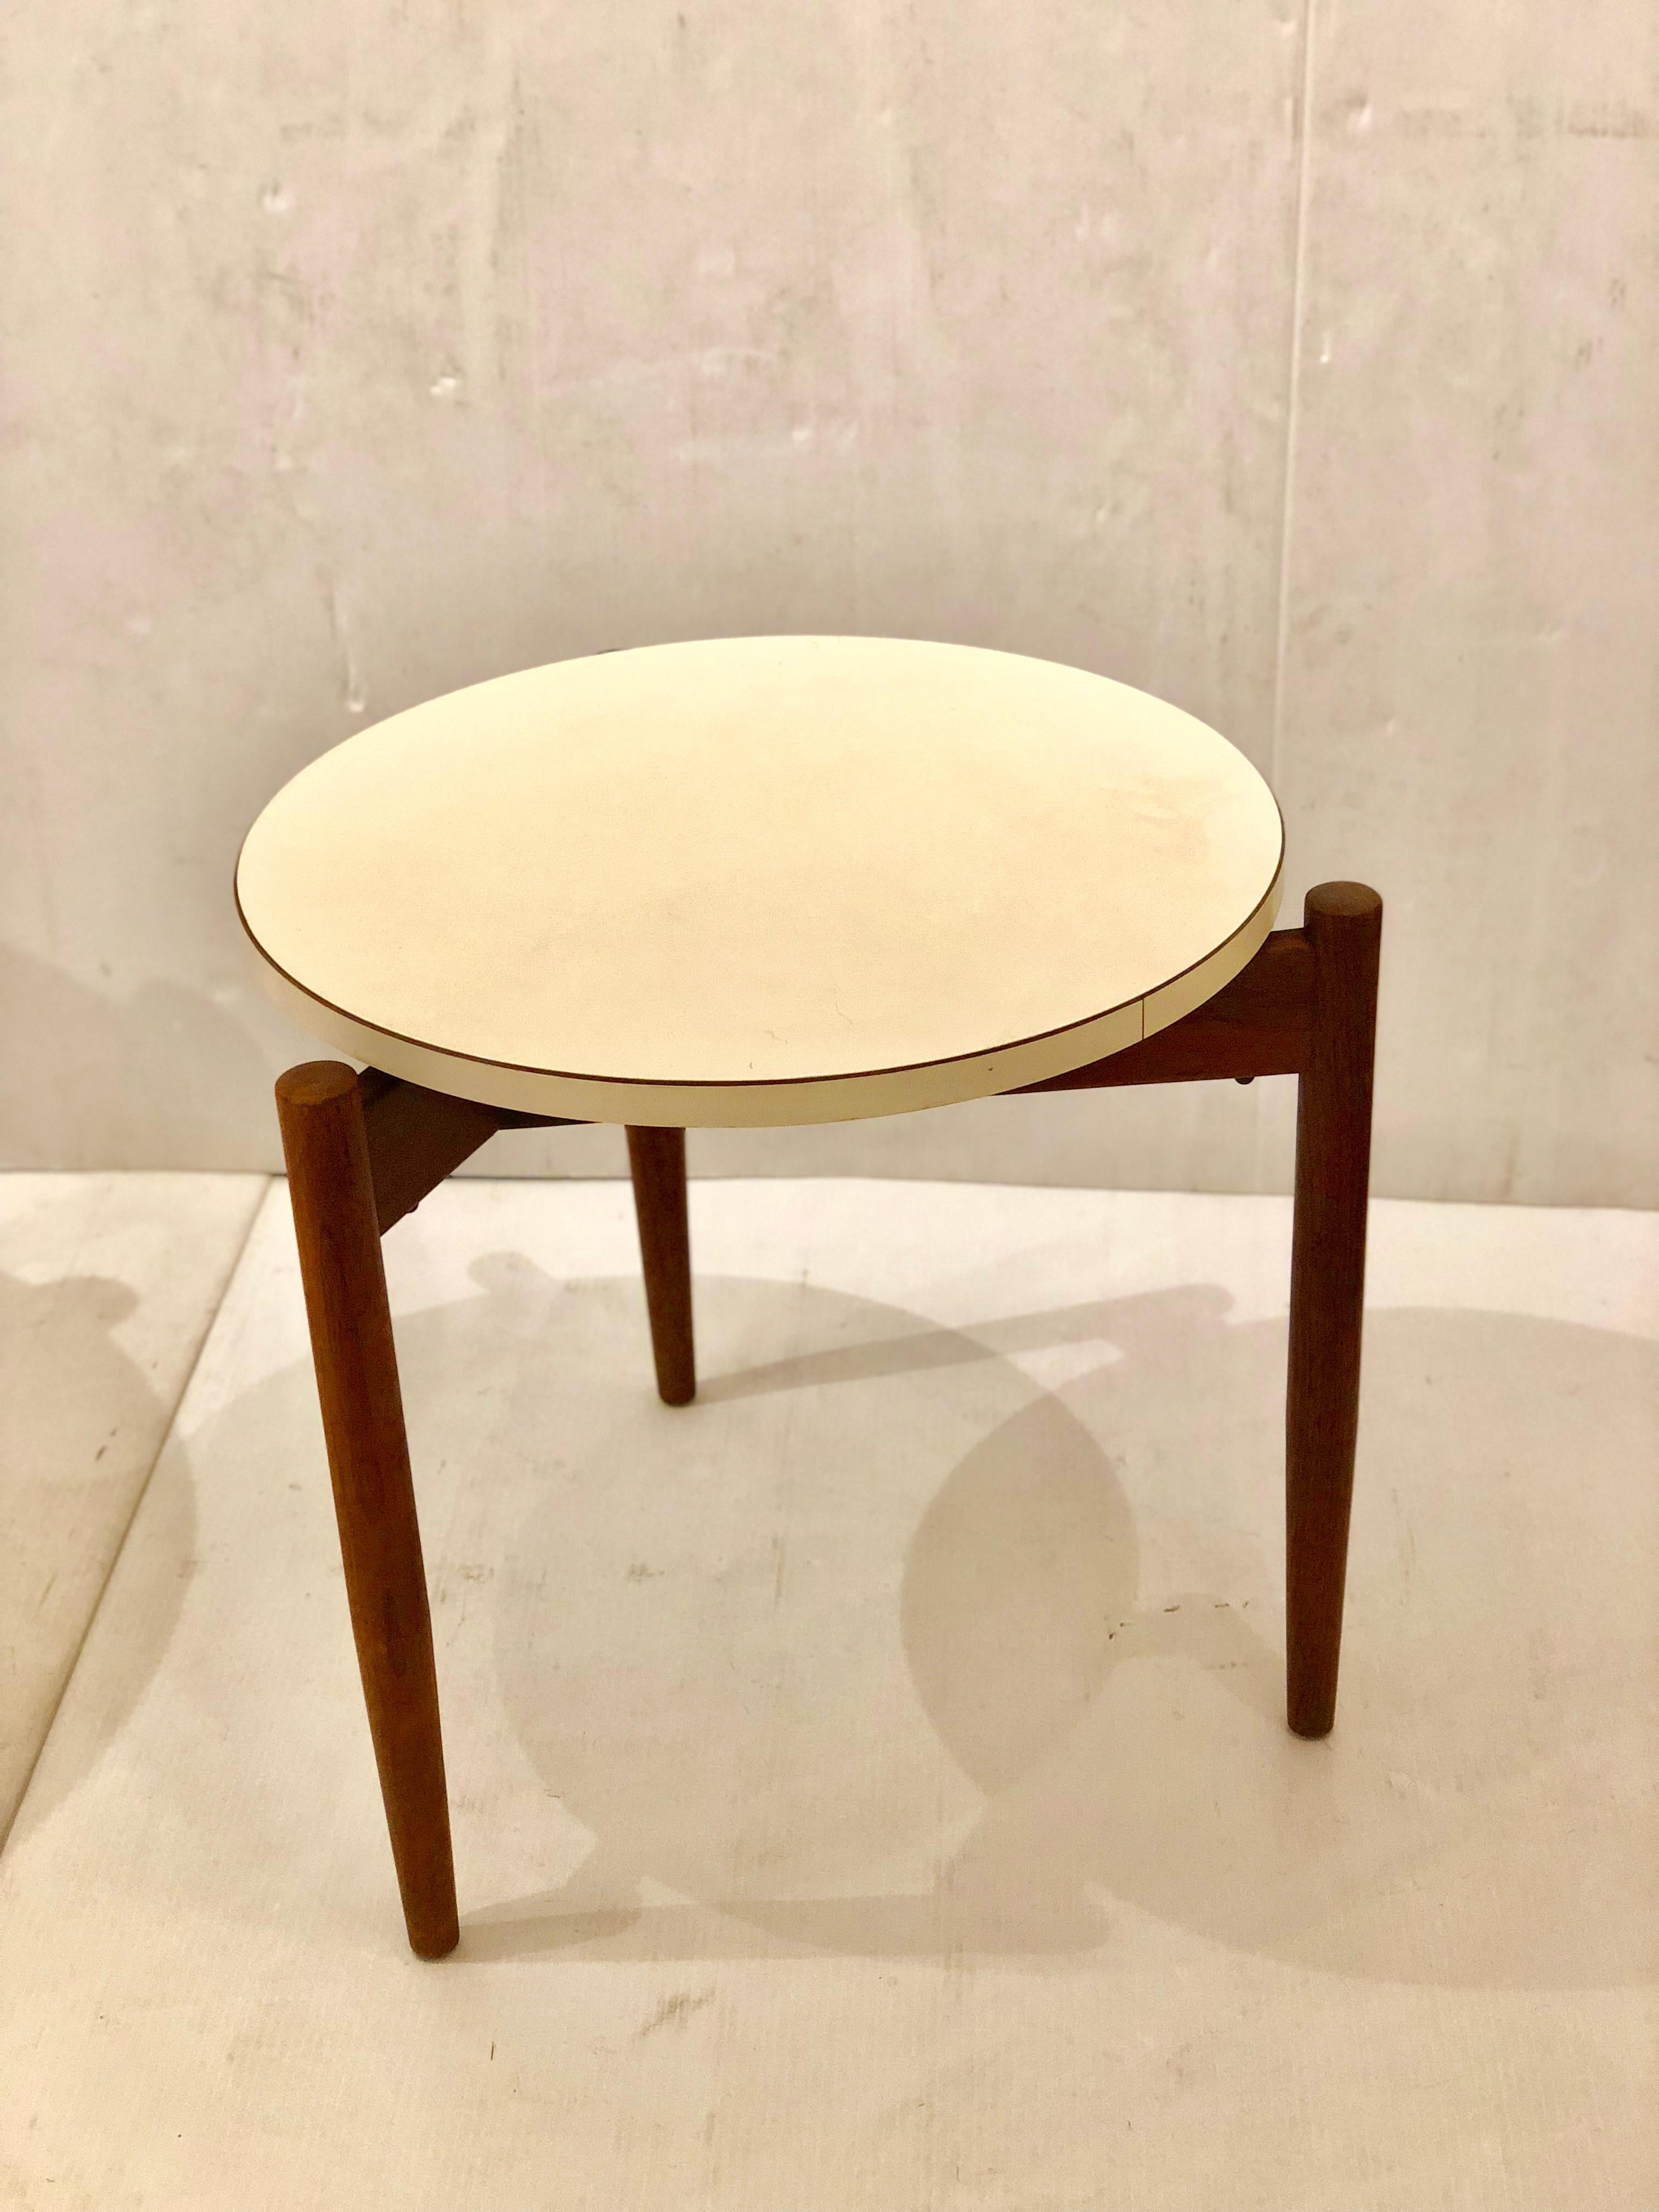 Nice and rare 3-legged cocktail end table designed by Jens Risom, white laminated round top with solid walnut frame.